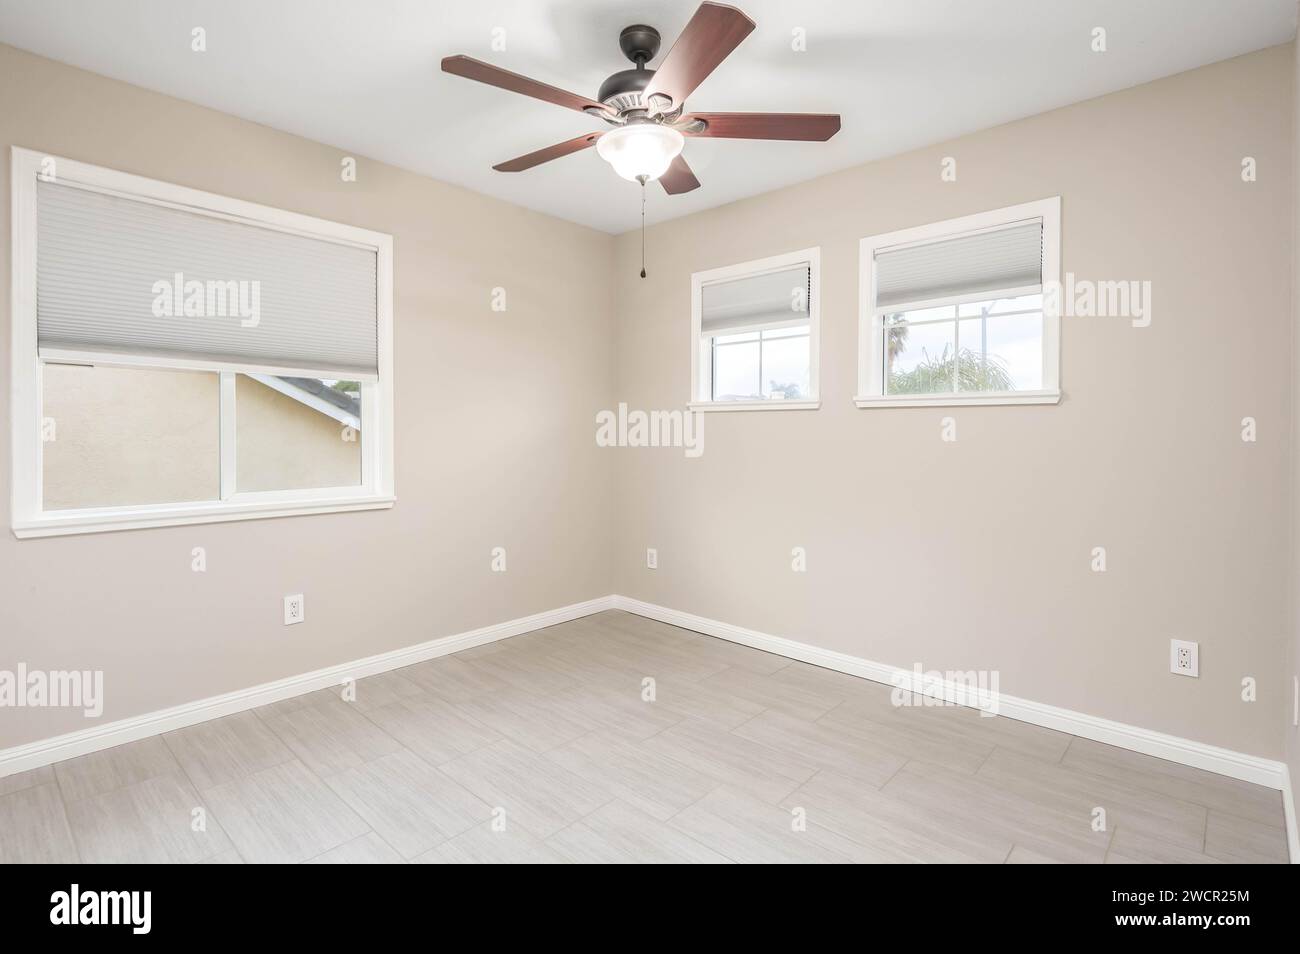 Empty Real Estate bedroom with bright walls, ceiling fan and windows. Great for virtual staging and real estate content Stock Photo